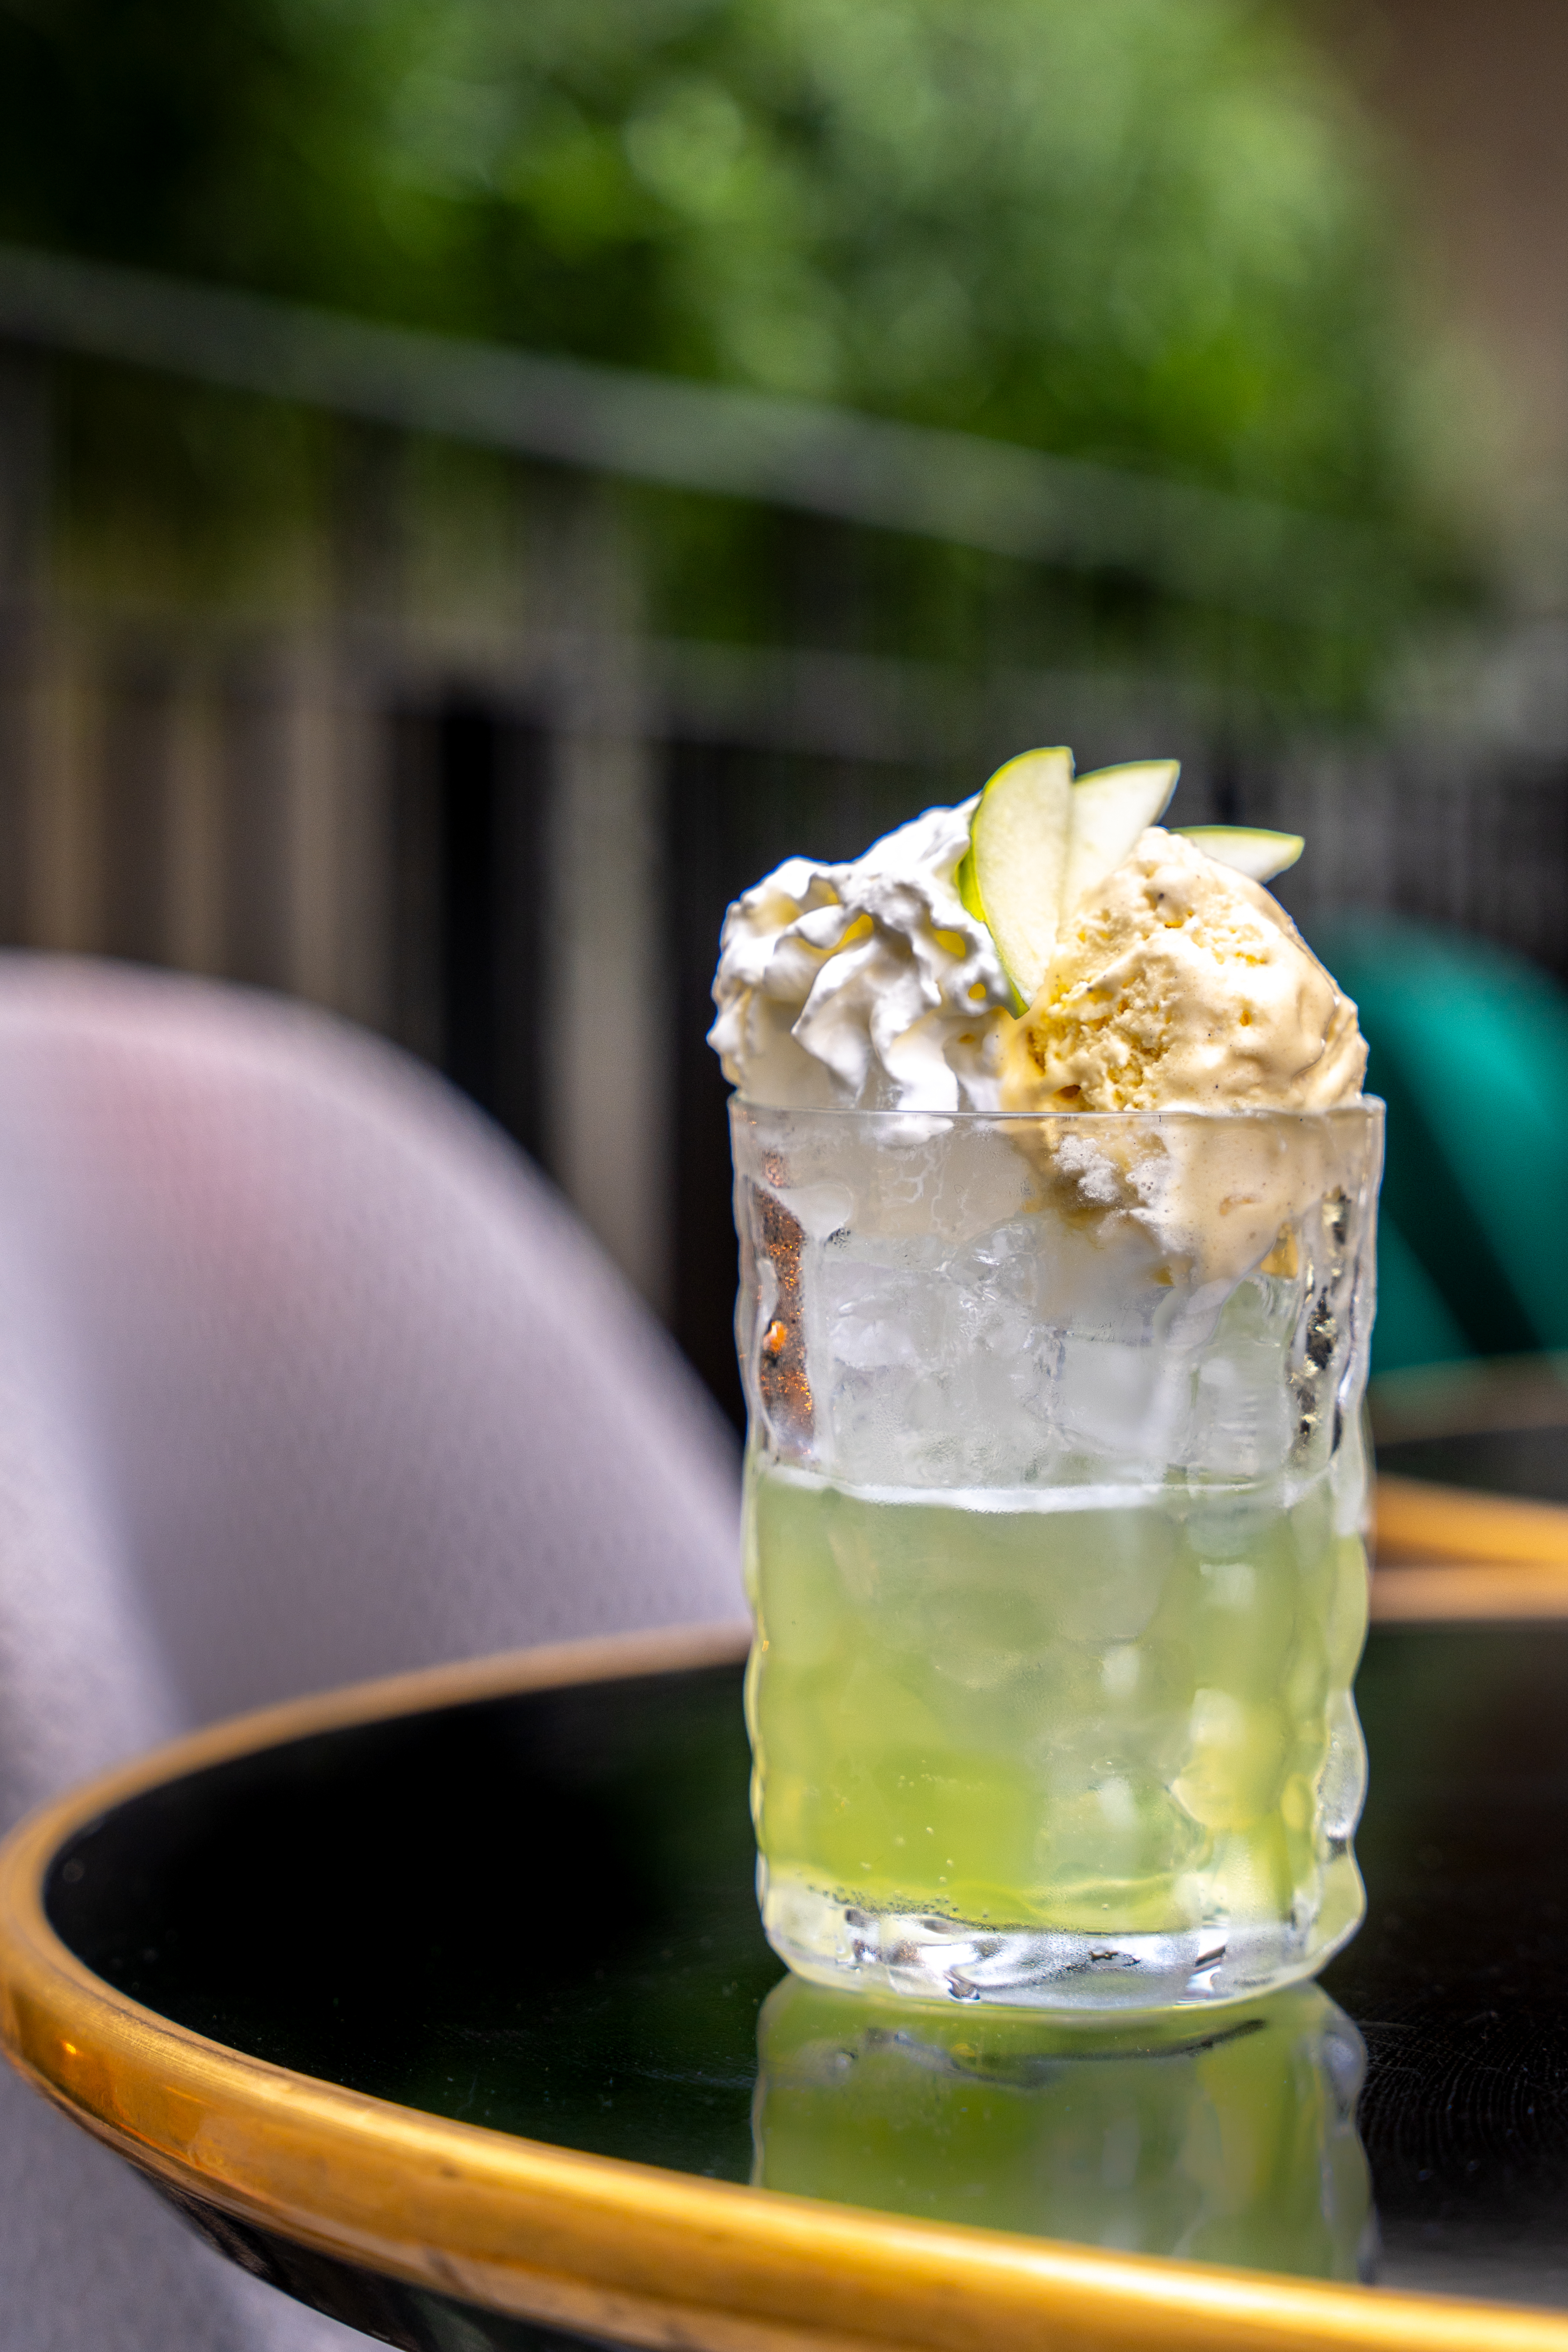 On the edge of a black coffee table there is a clear glass that contains a green drink. The drink is topped with whipped cream. In the background there are bar seats. 